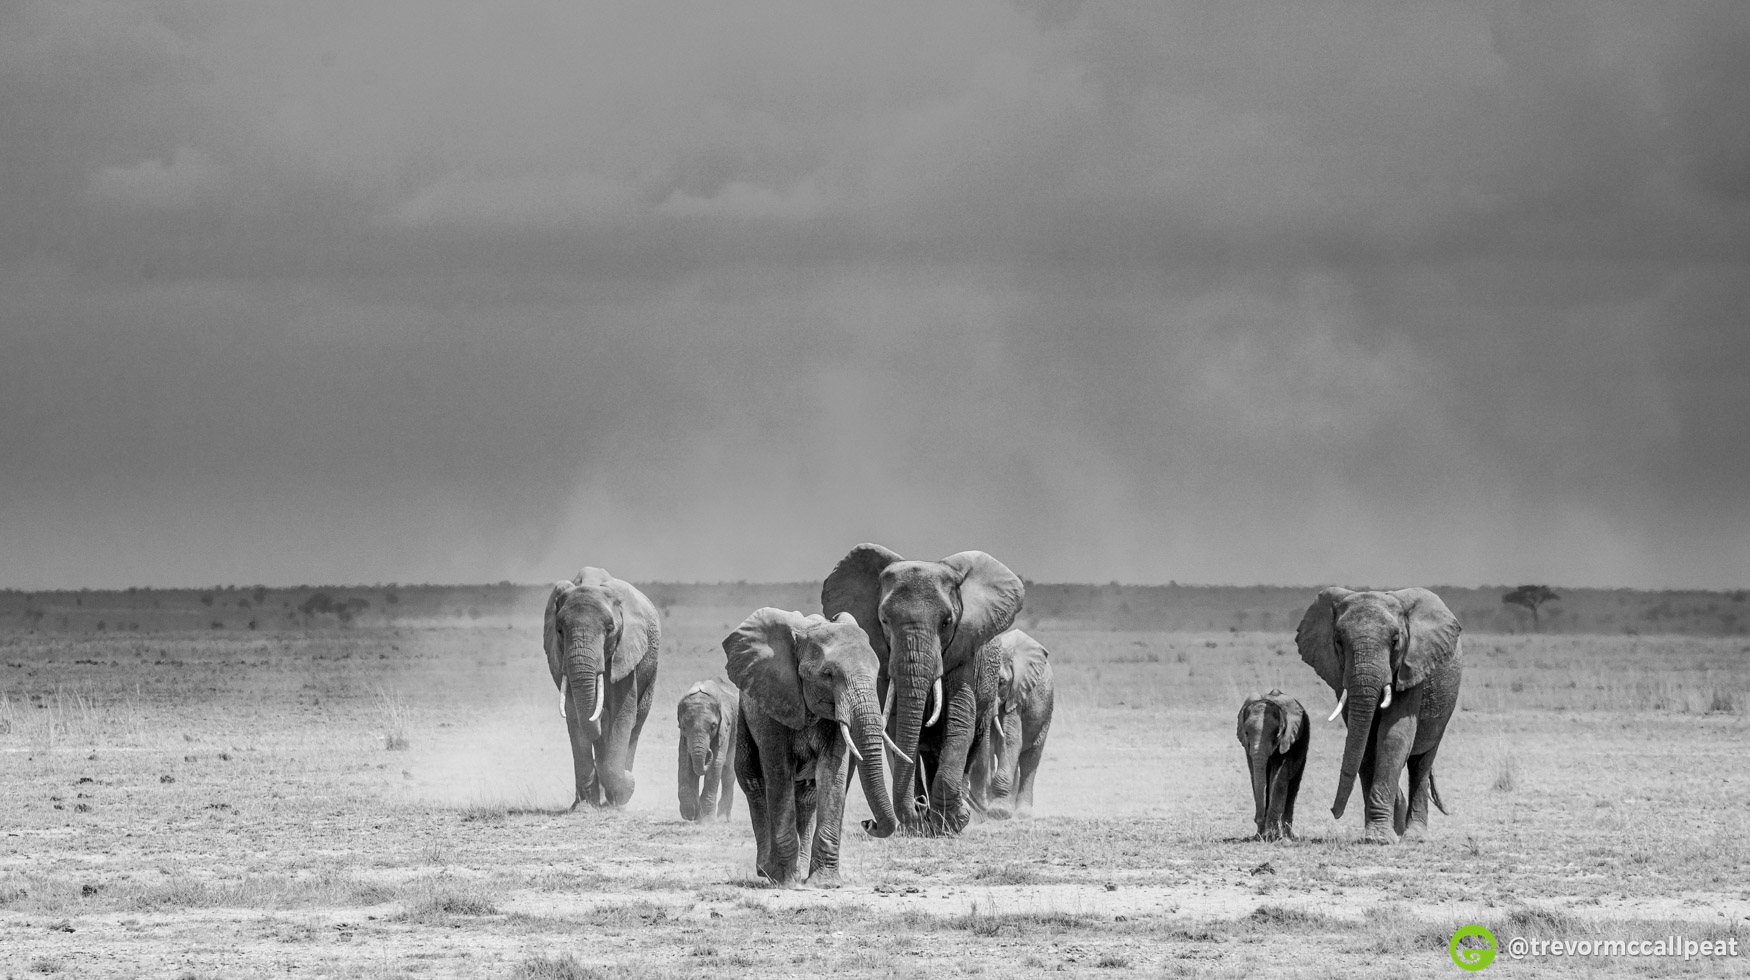 My Top 10 Images of the year / Best Safari in Africa